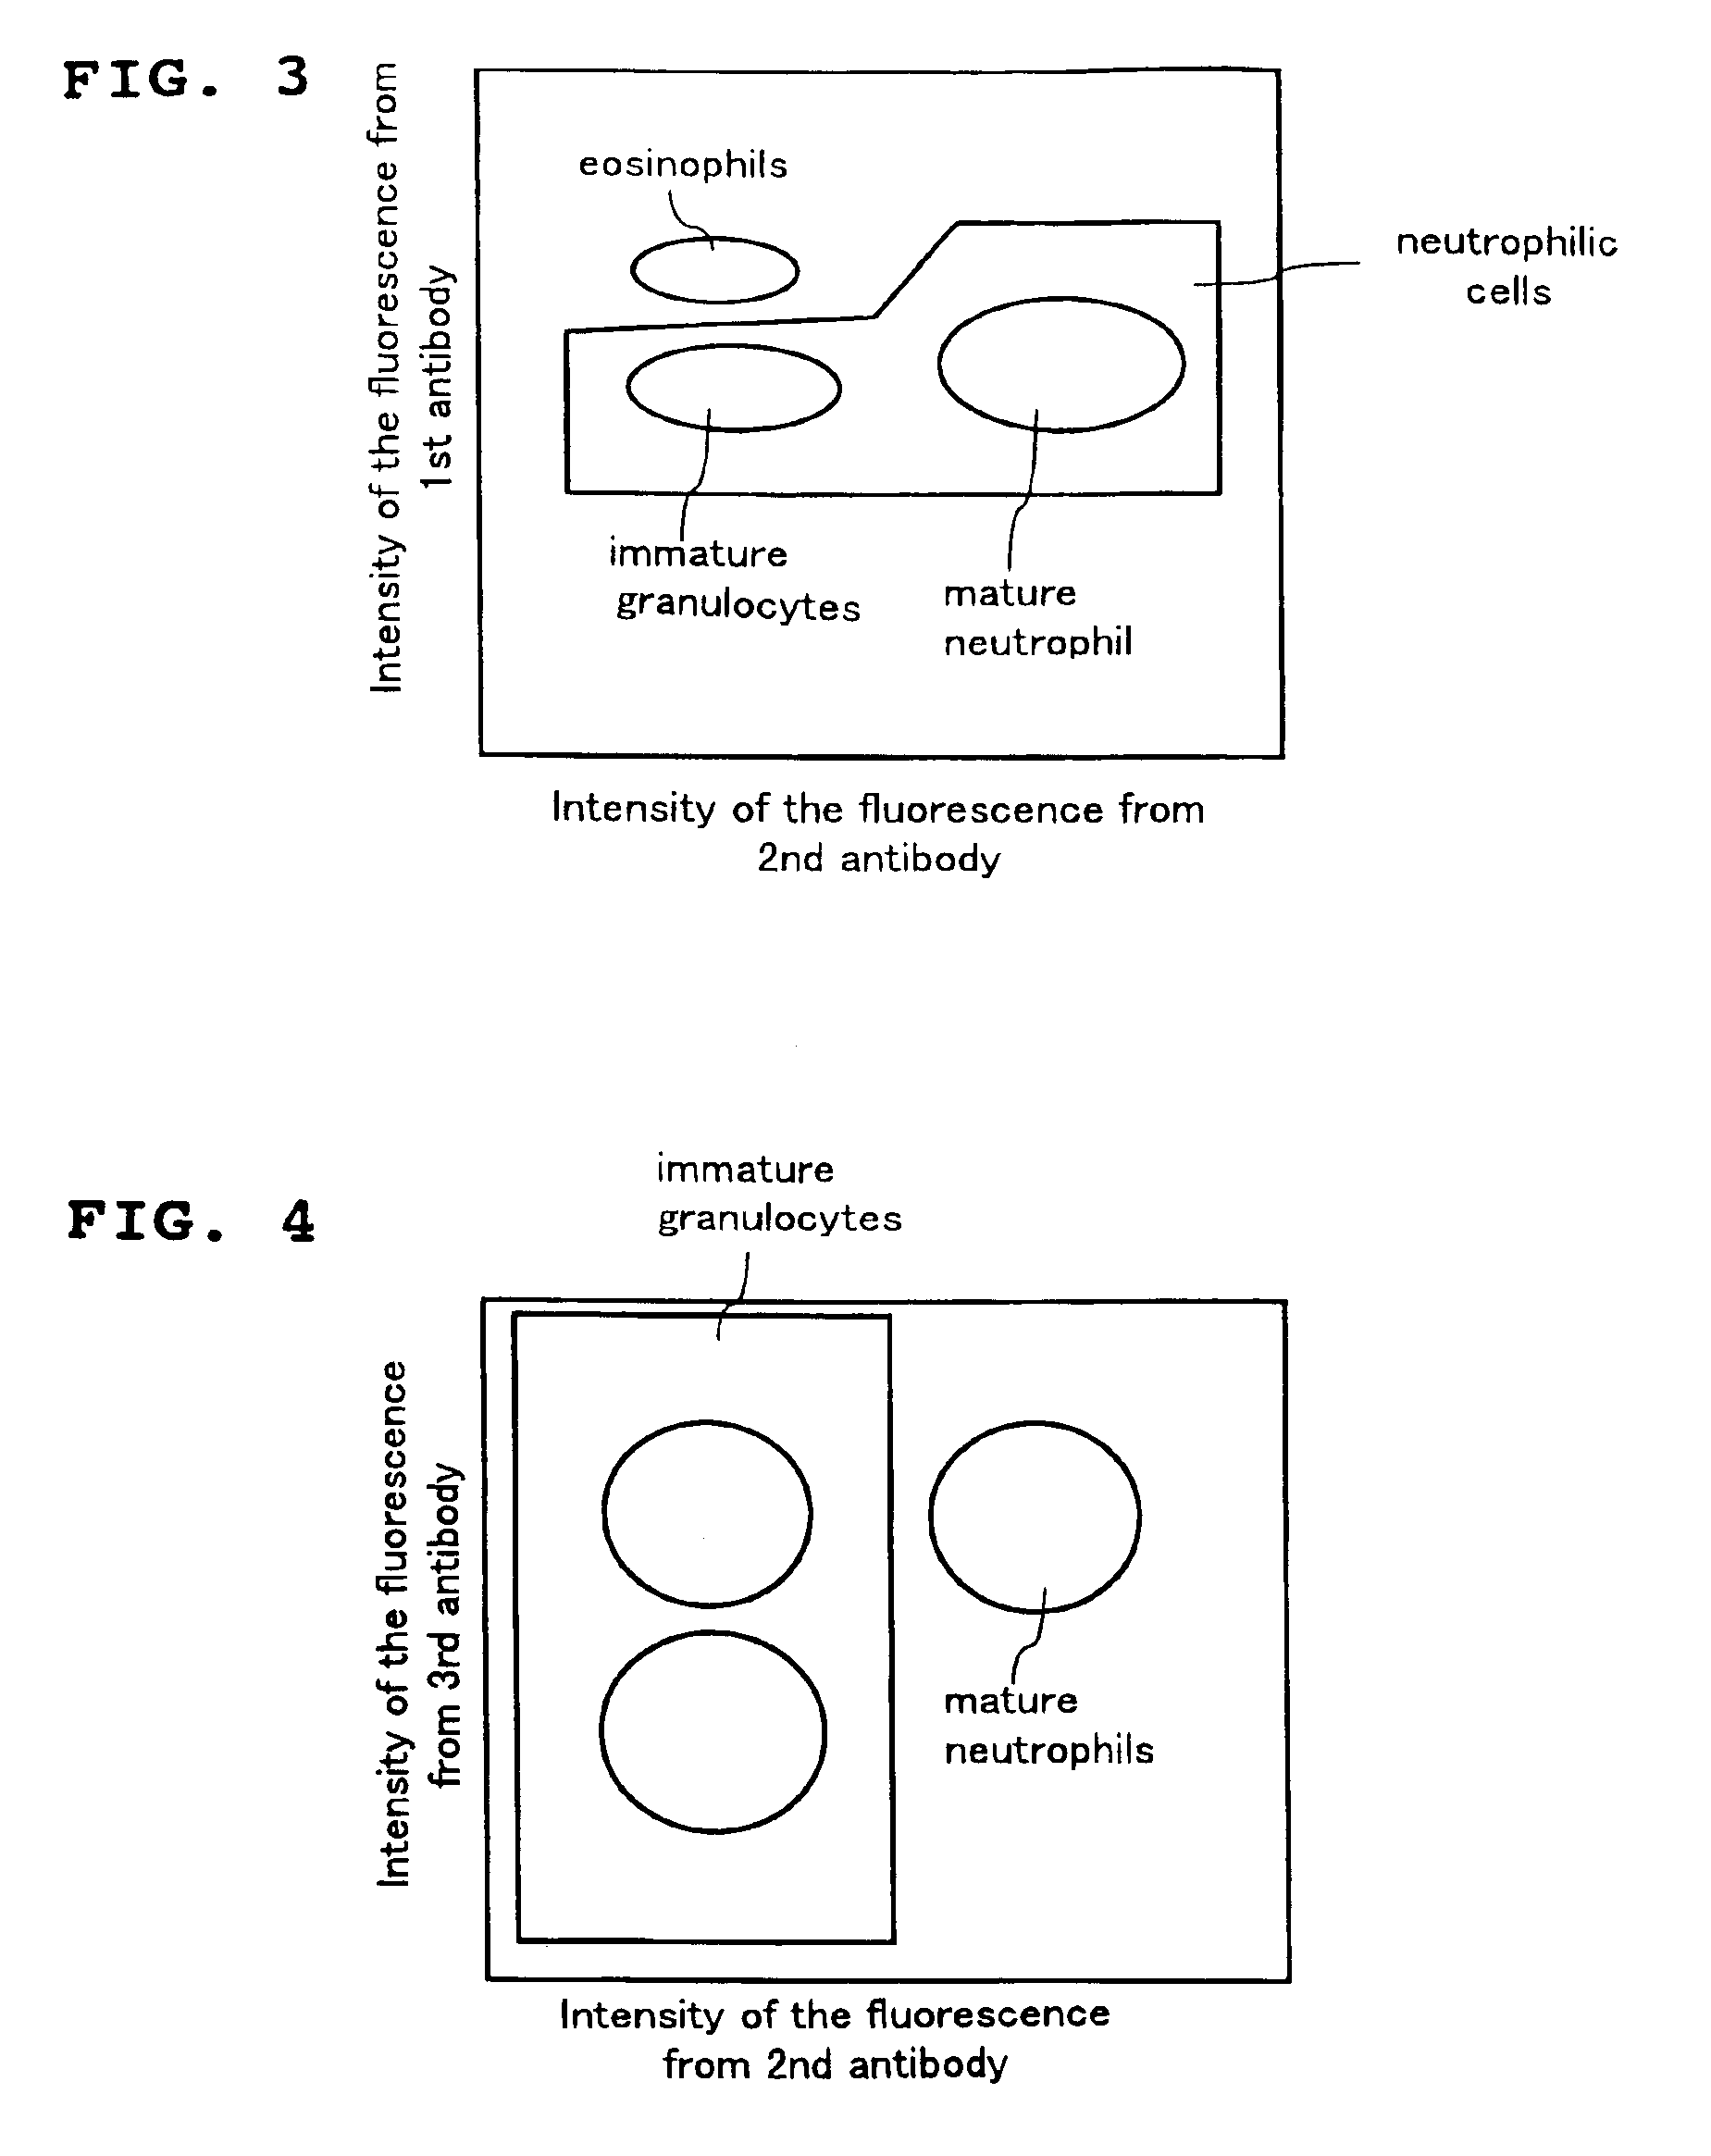 Method for classifying and counting leukocytes